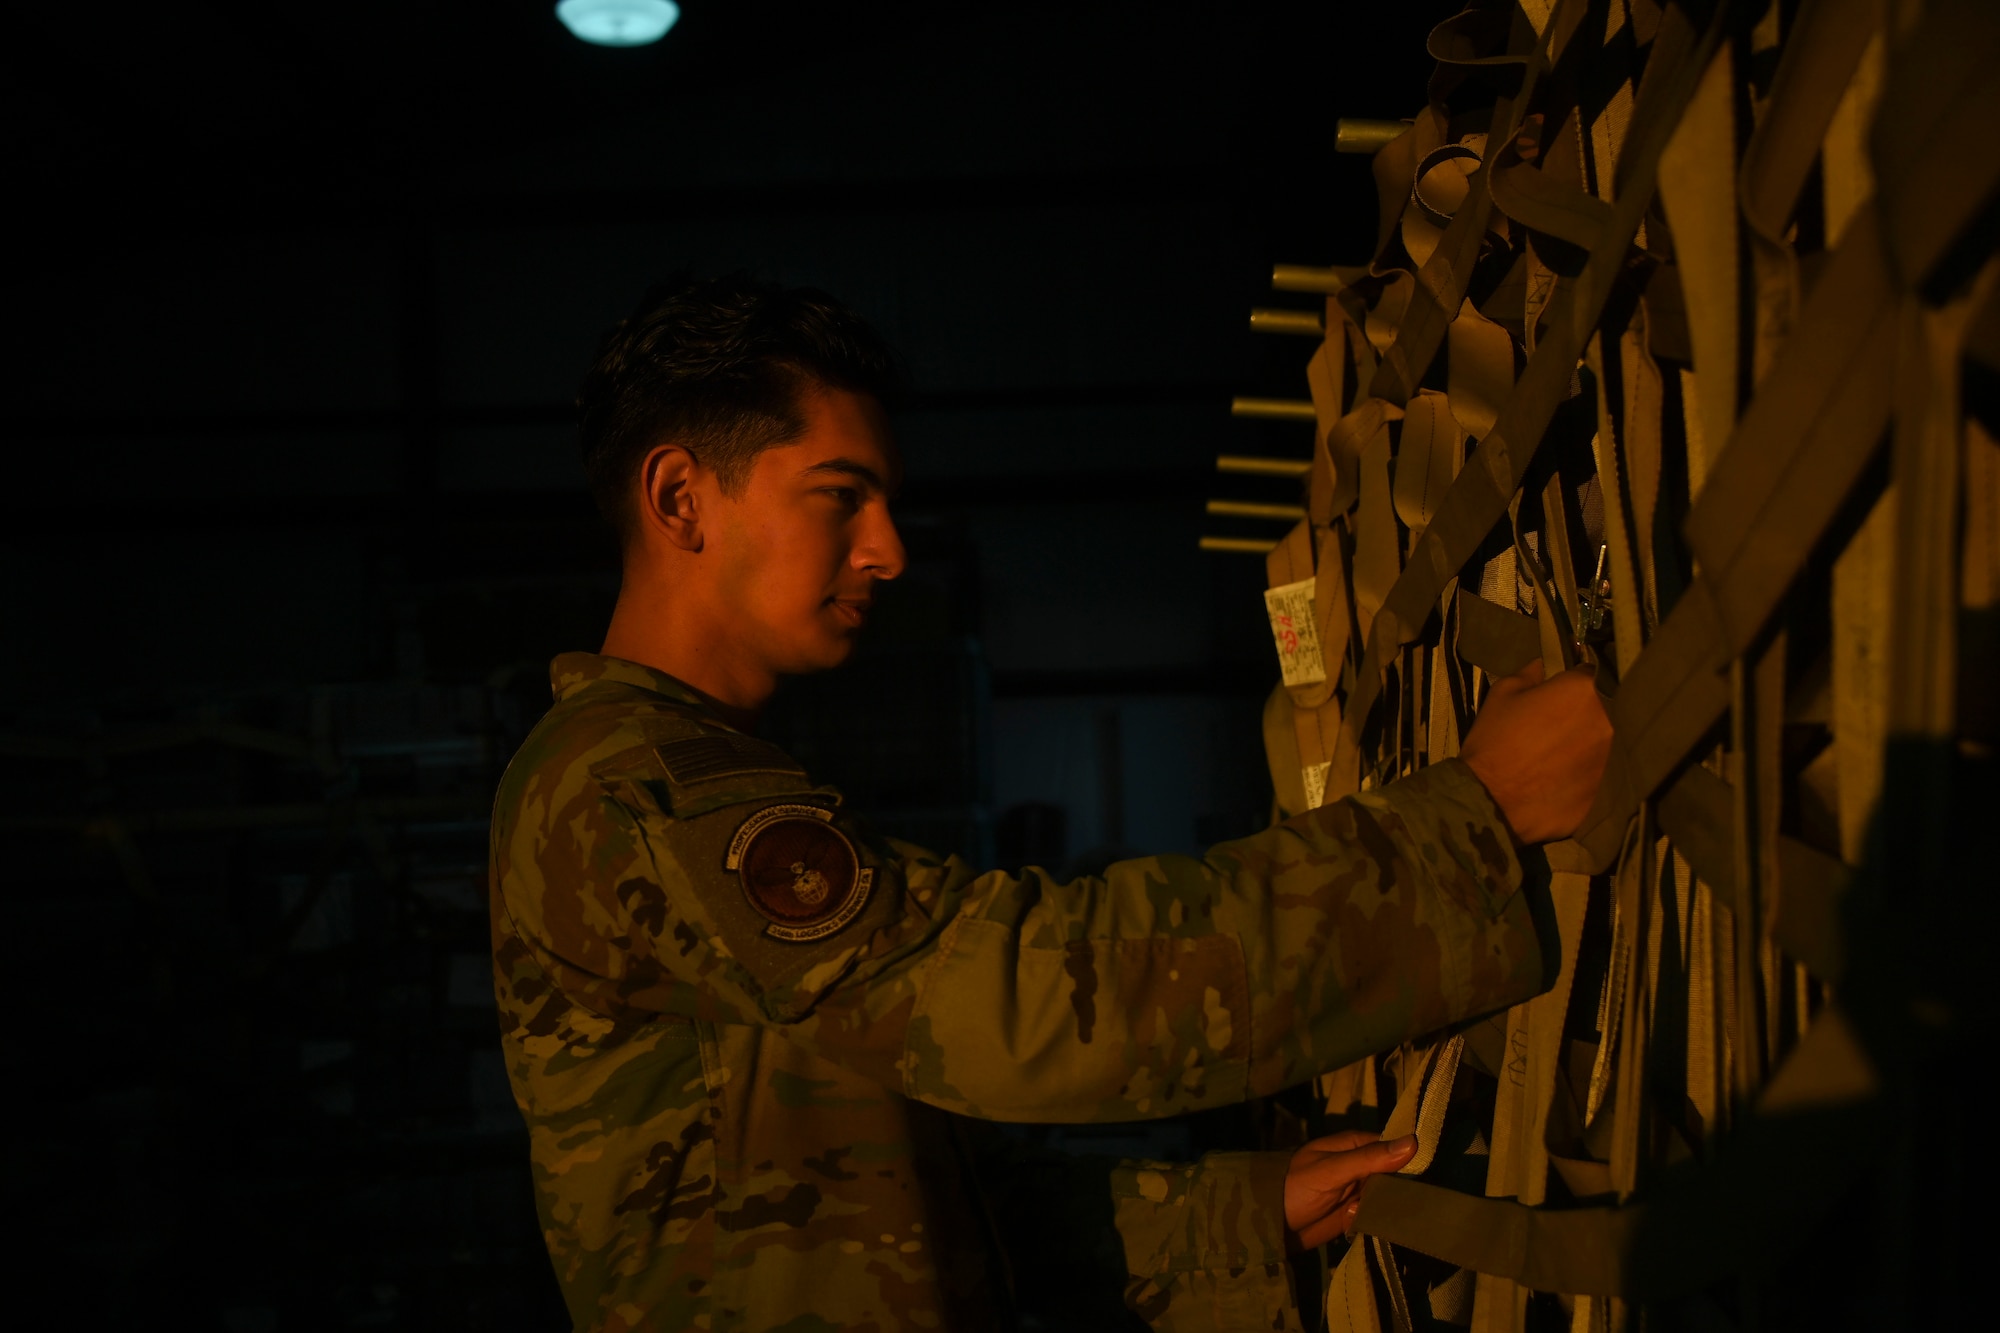 Airman 1st Class Ryan Maclaren, 316th Logistics Readiness Squadron vehicle operator, checks the tightness of cargo straps prior to a training exercise at Joint Base Andrews, Md., Nov. 2, 2022. The cargo deployment function enables the support of mission partners by fostering communication and the ability to work together on different parts of the same mission to mobilize assets wherever the mission requires. (U.S. Air Force photo by Staff Sgt. Spencer Slocum)